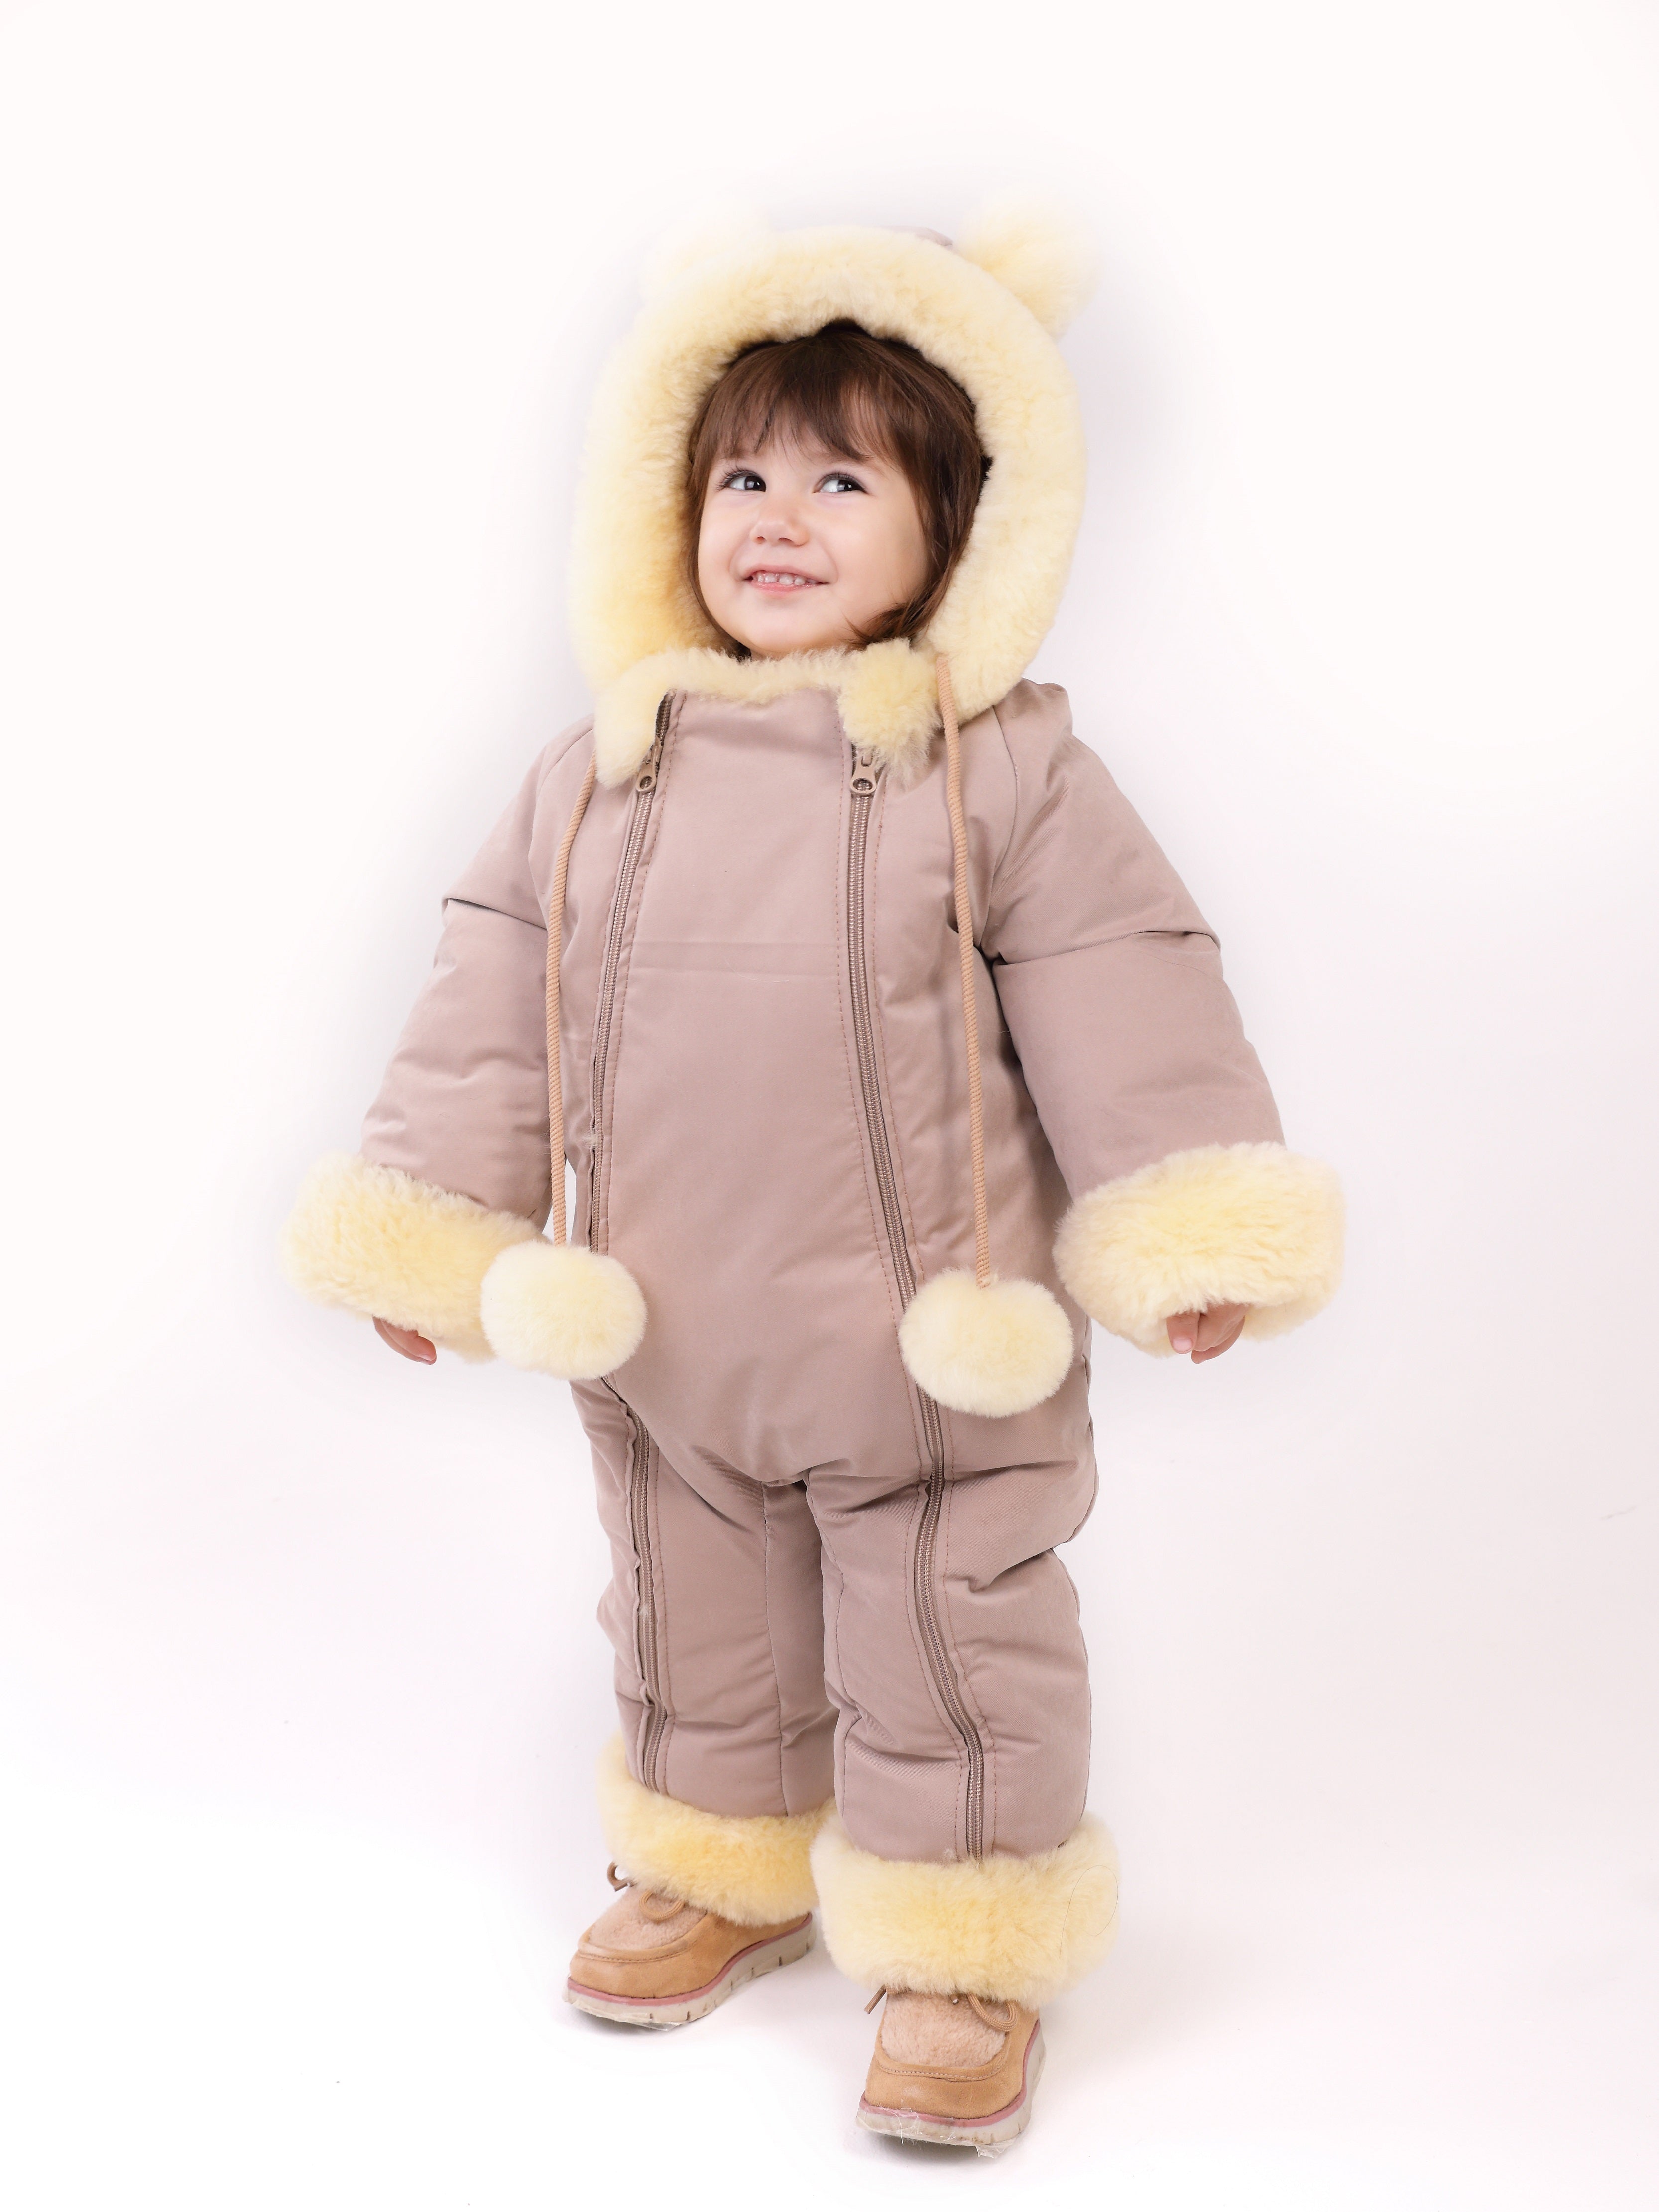 How To Dress A Baby In The Winter